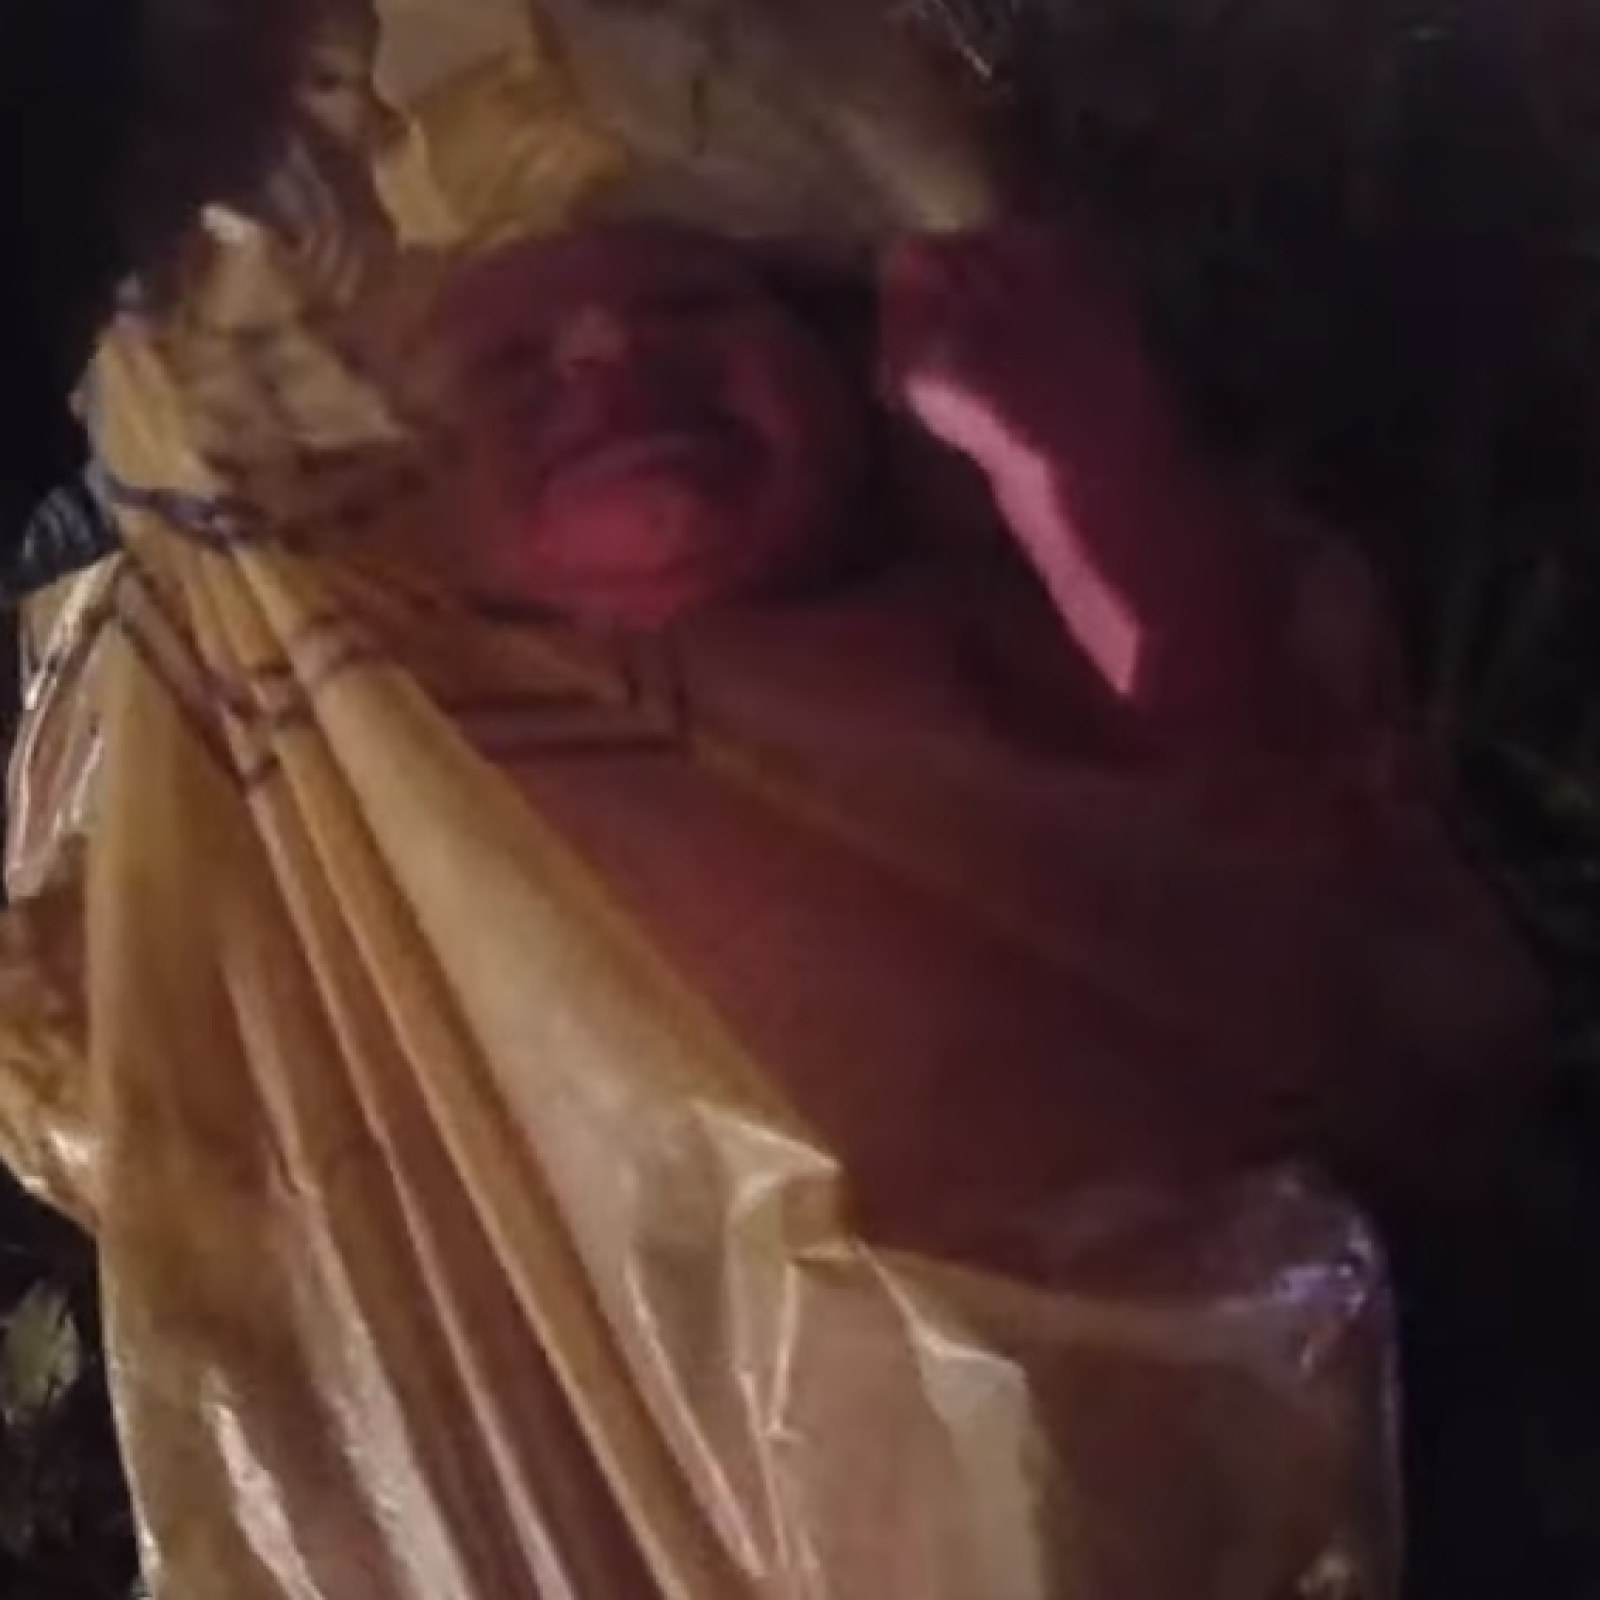 Bodycam Video Shows Dramatic Moment Police Found Baby in Plastic Bag Abandoned in Georgia Woods: 'Look at You Sweetheart'